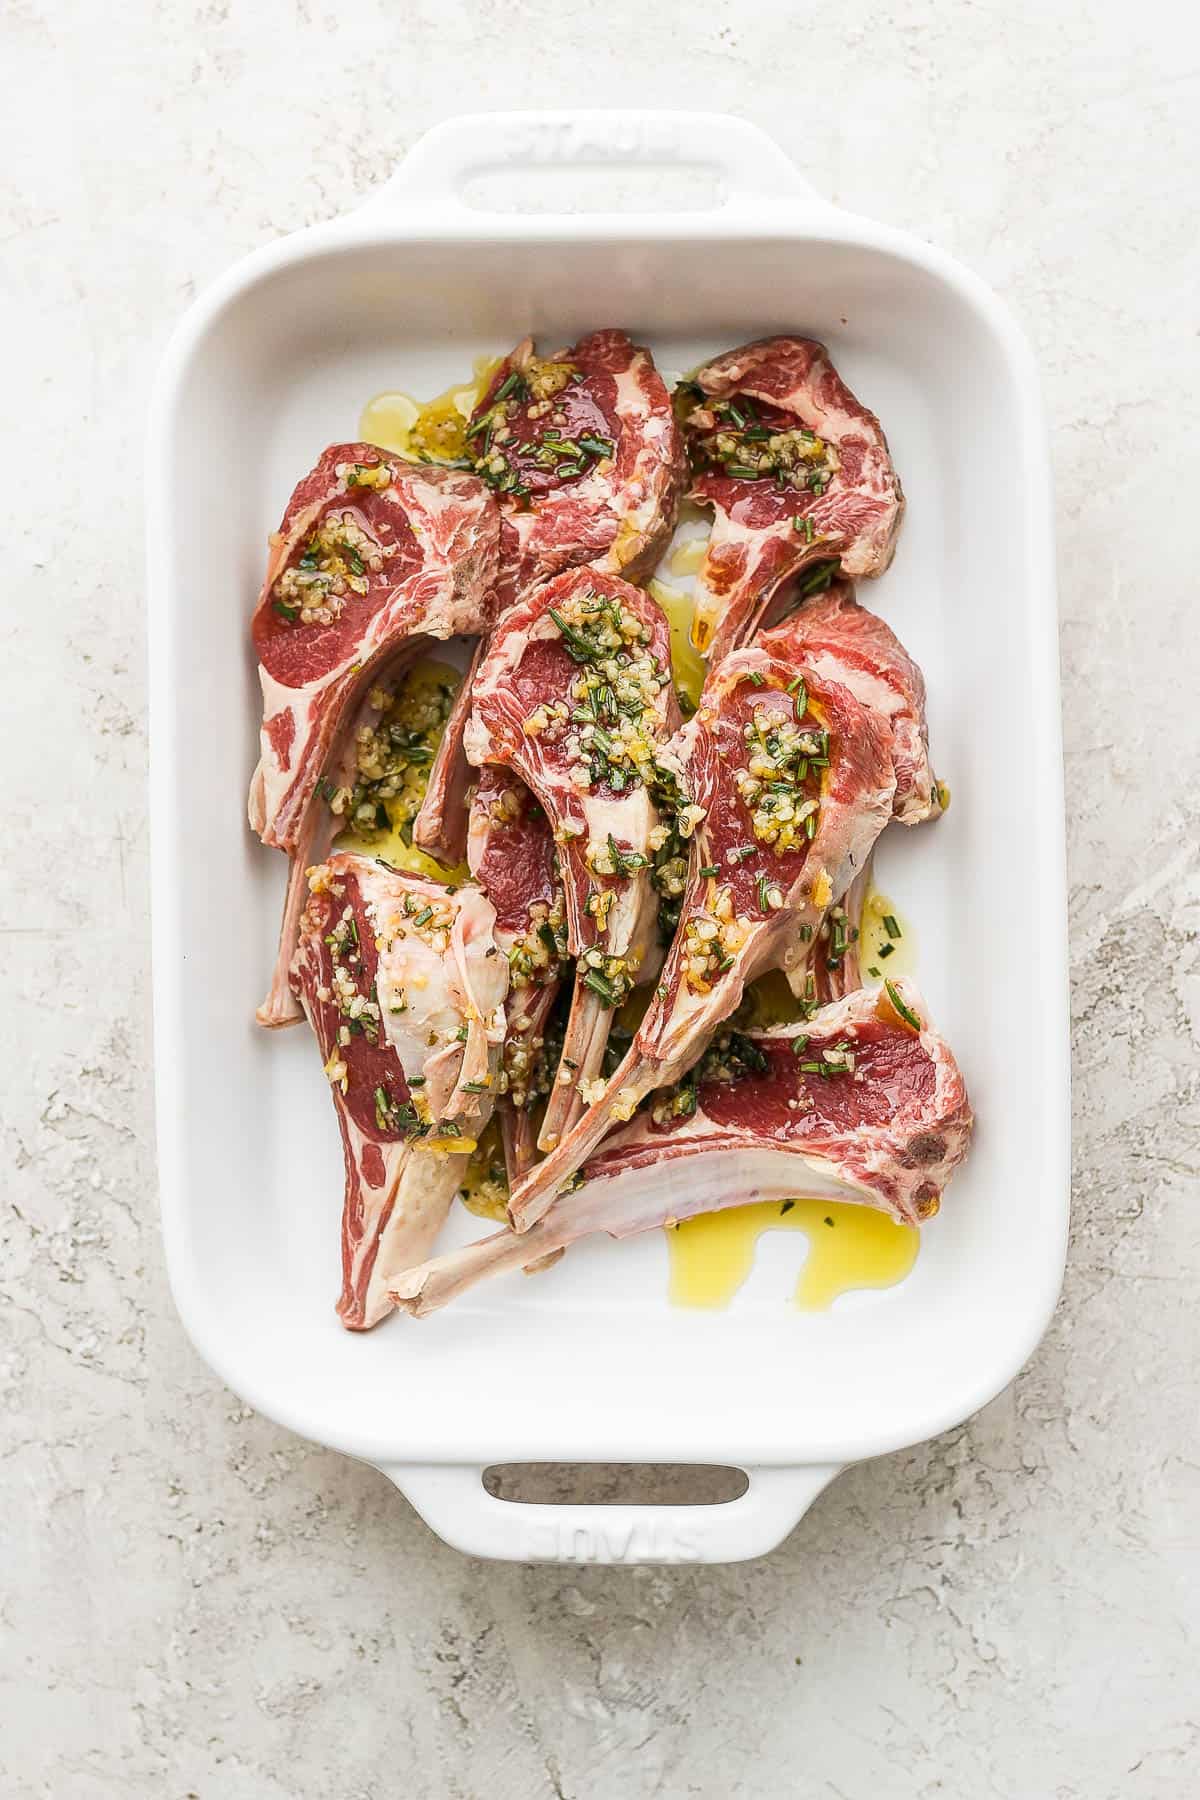 Lamb chops with the marinade in a baking dish.